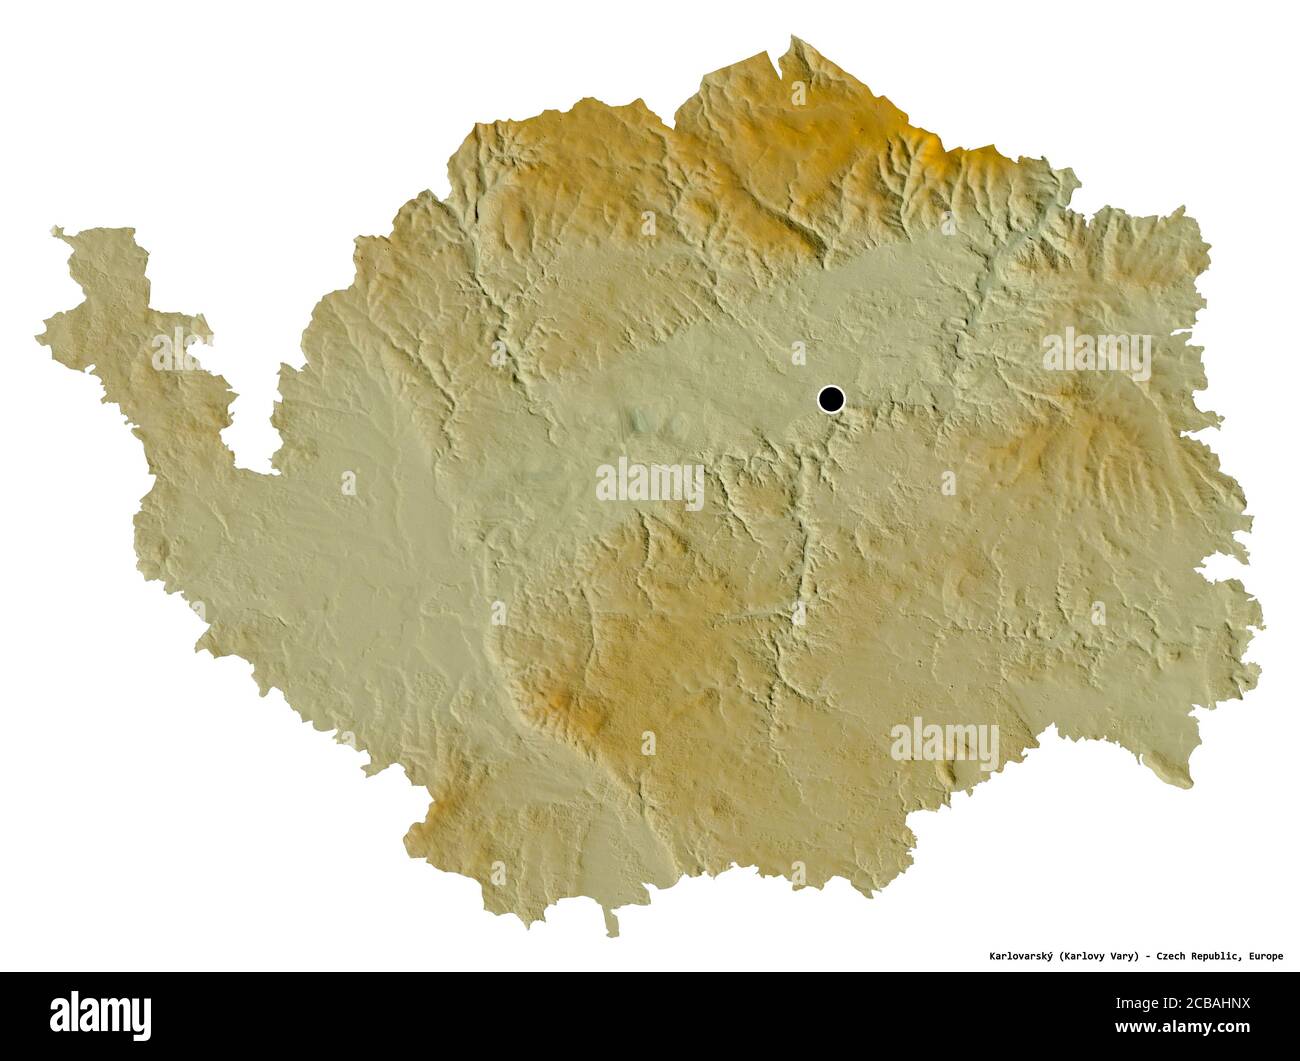 Shape of Karlovarský, region of Czech Republic, with its capital isolated on white background. Topographic relief map. 3D rendering Stock Photo